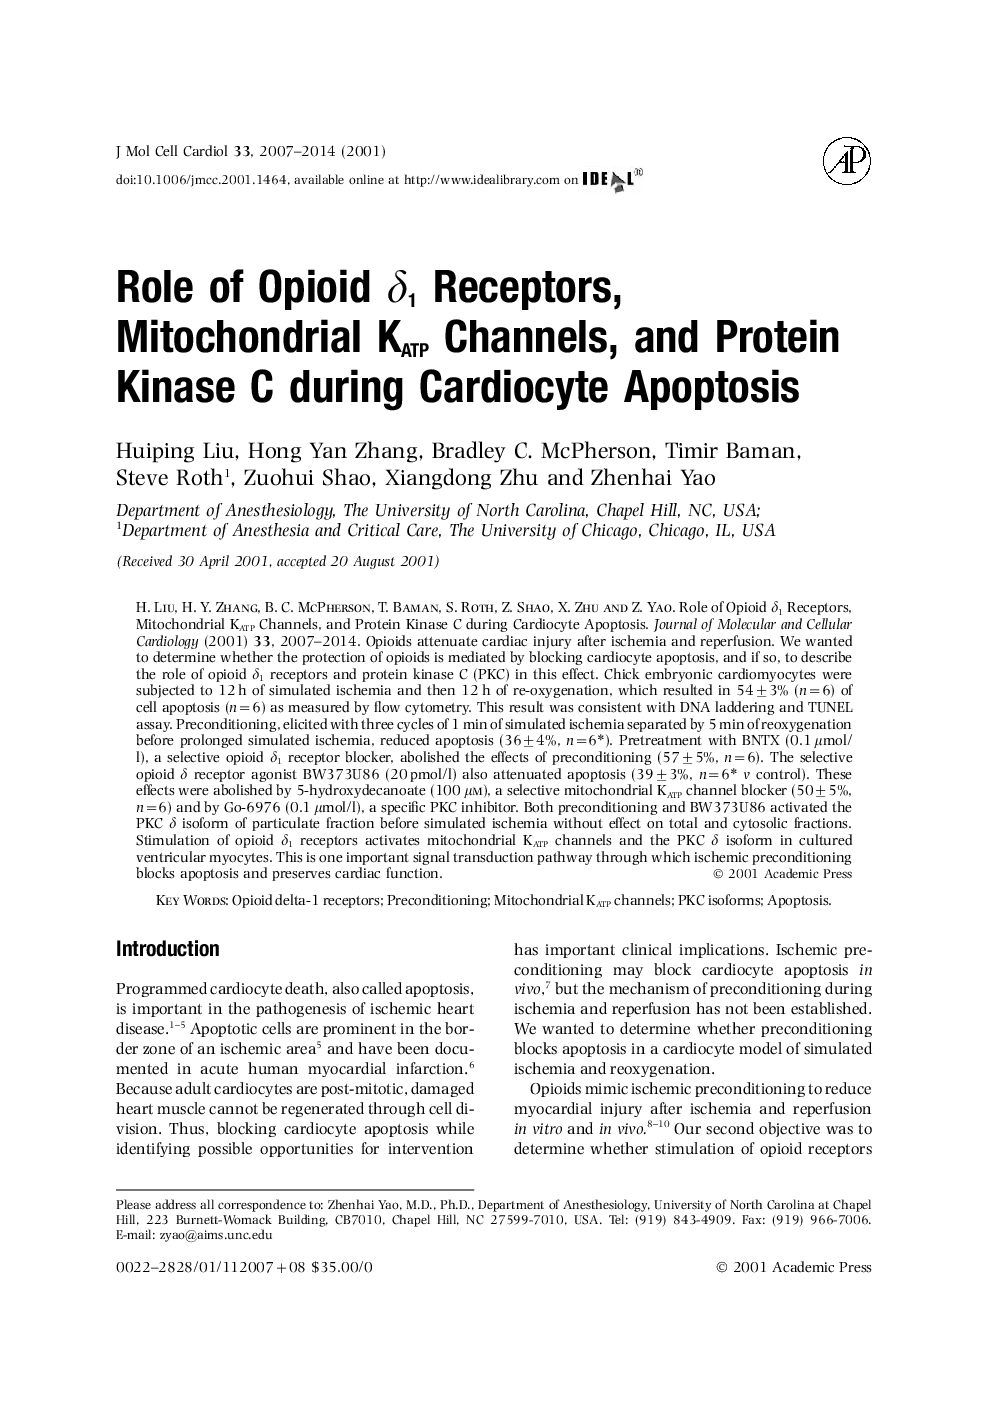 Role of Opioid δ1Receptors, Mitochondrial KATPChannels, and Protein Kinase C during Cardiocyte Apoptosis